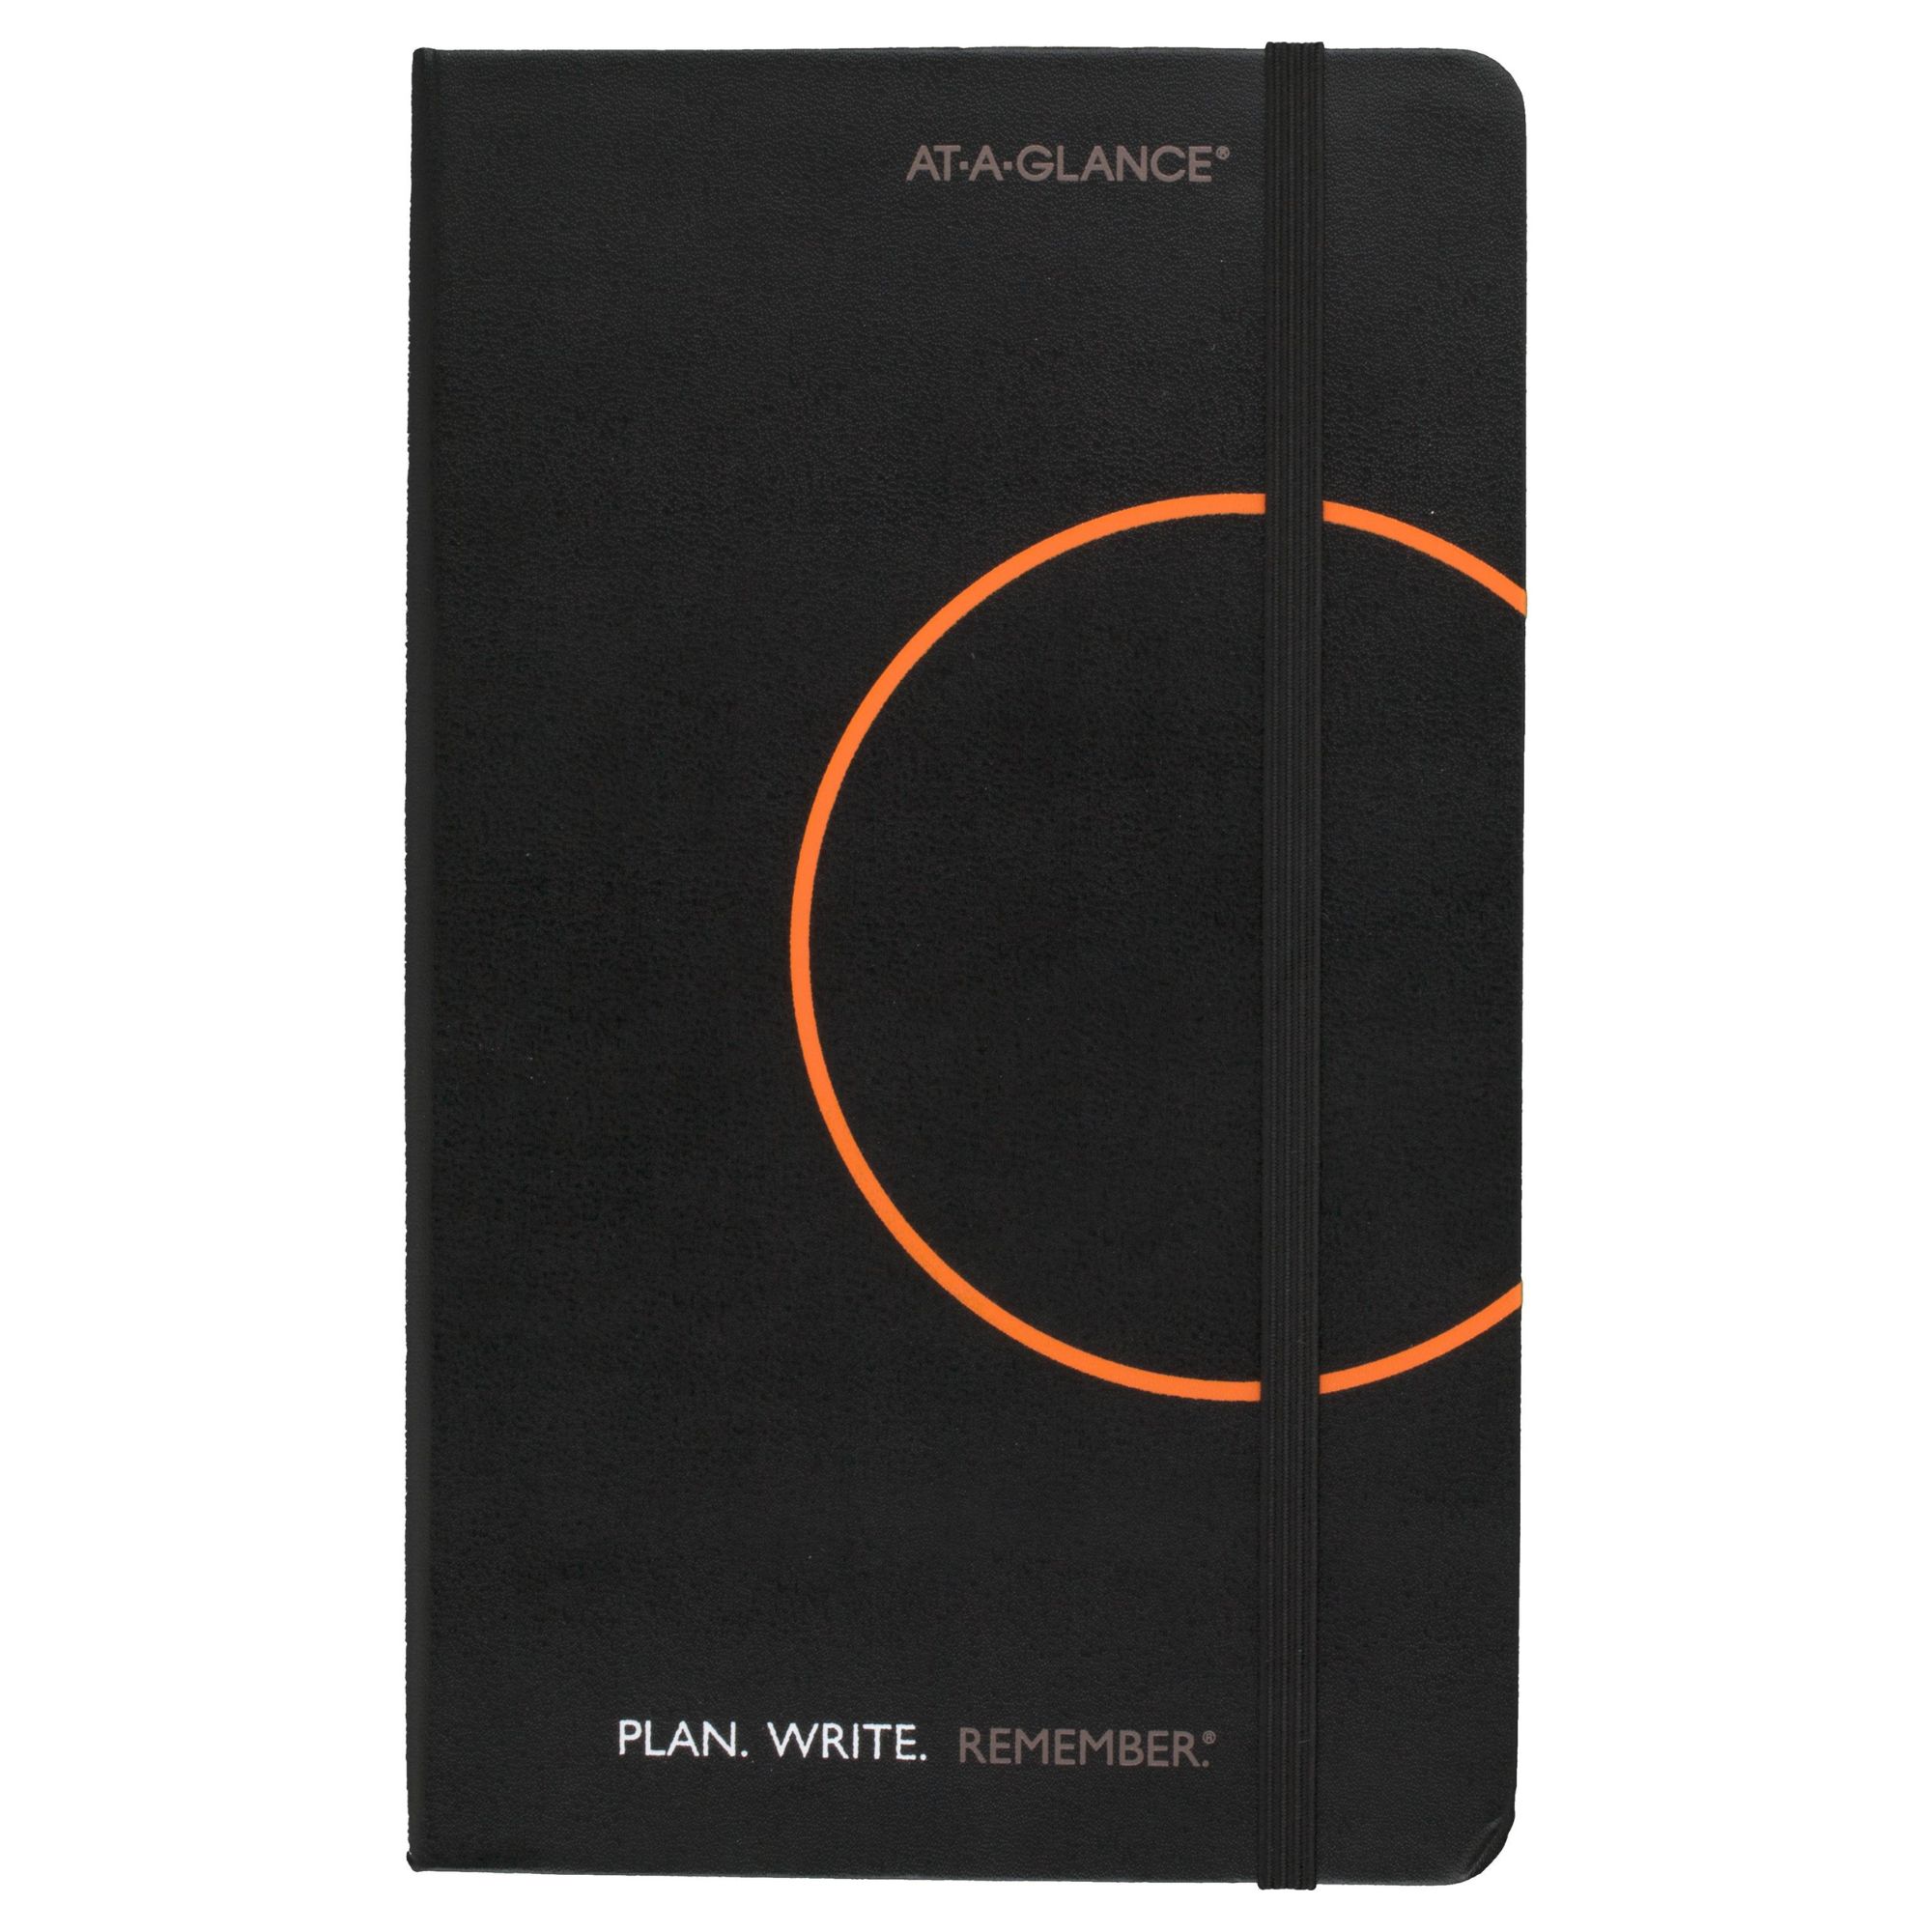 At-A-Glance 806 Plan. Write. Remember. Planning Notebook